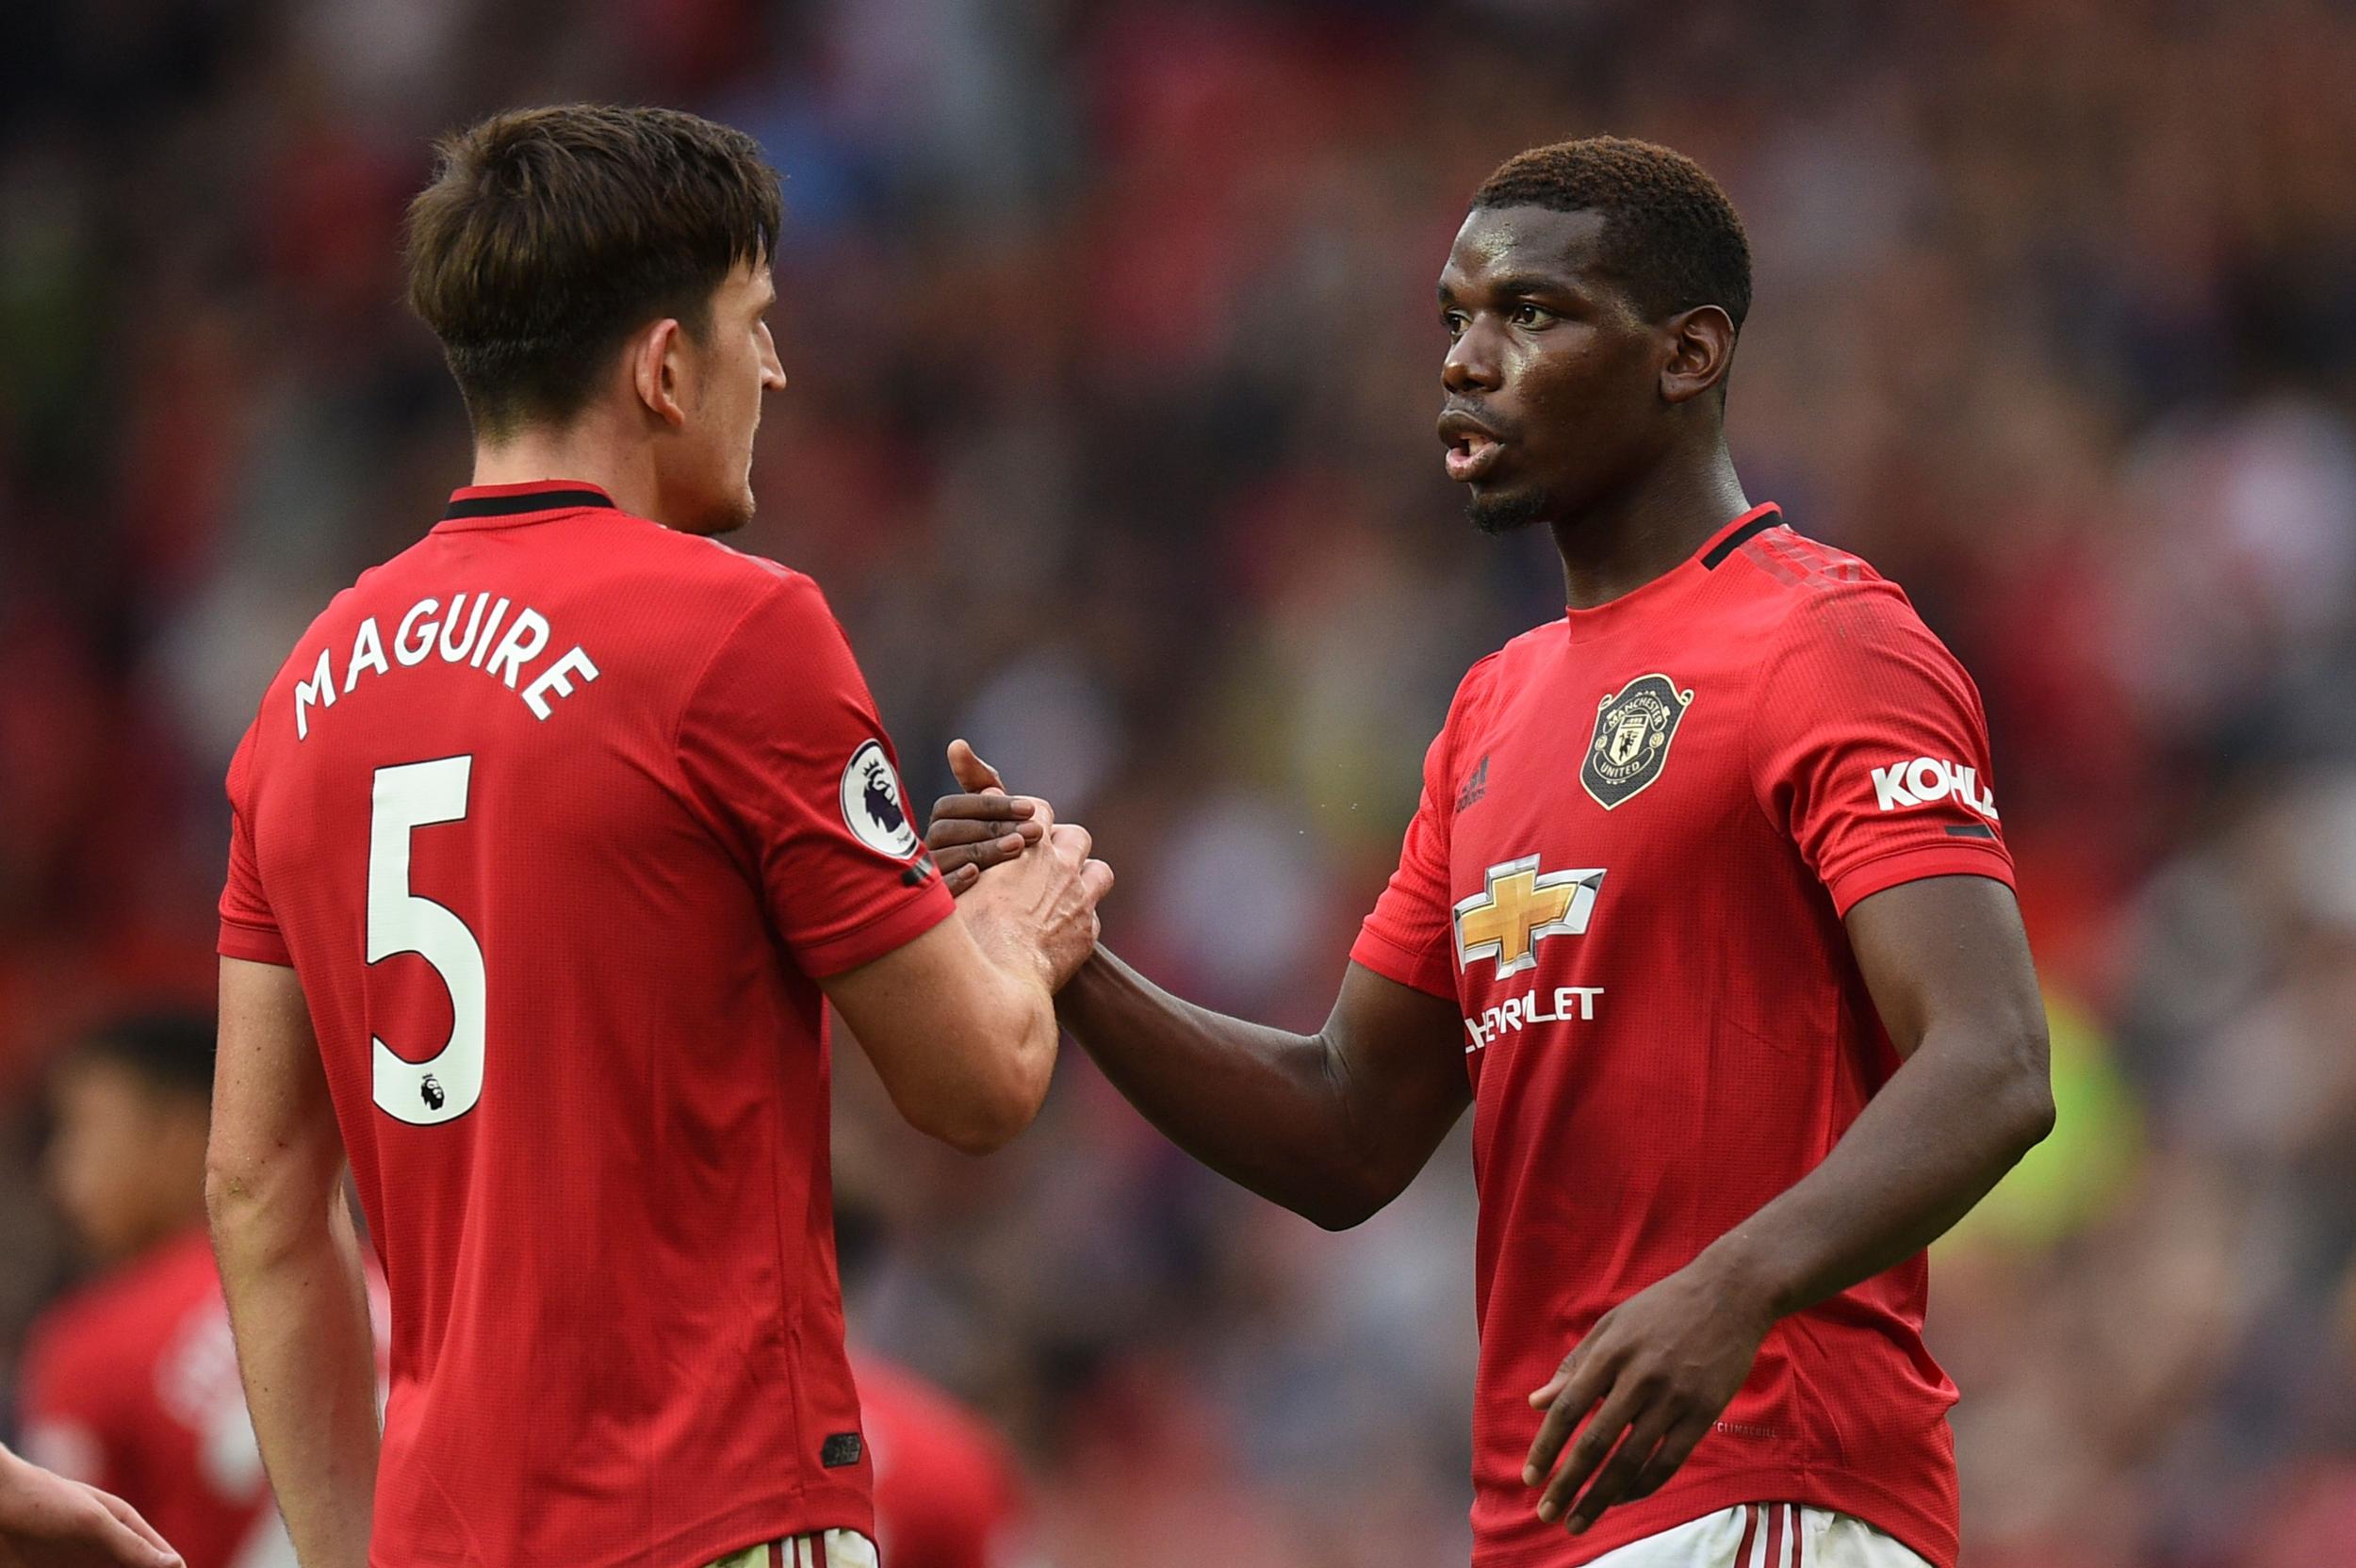 Harry Maguire and Paul Pogba playing for Manchester United